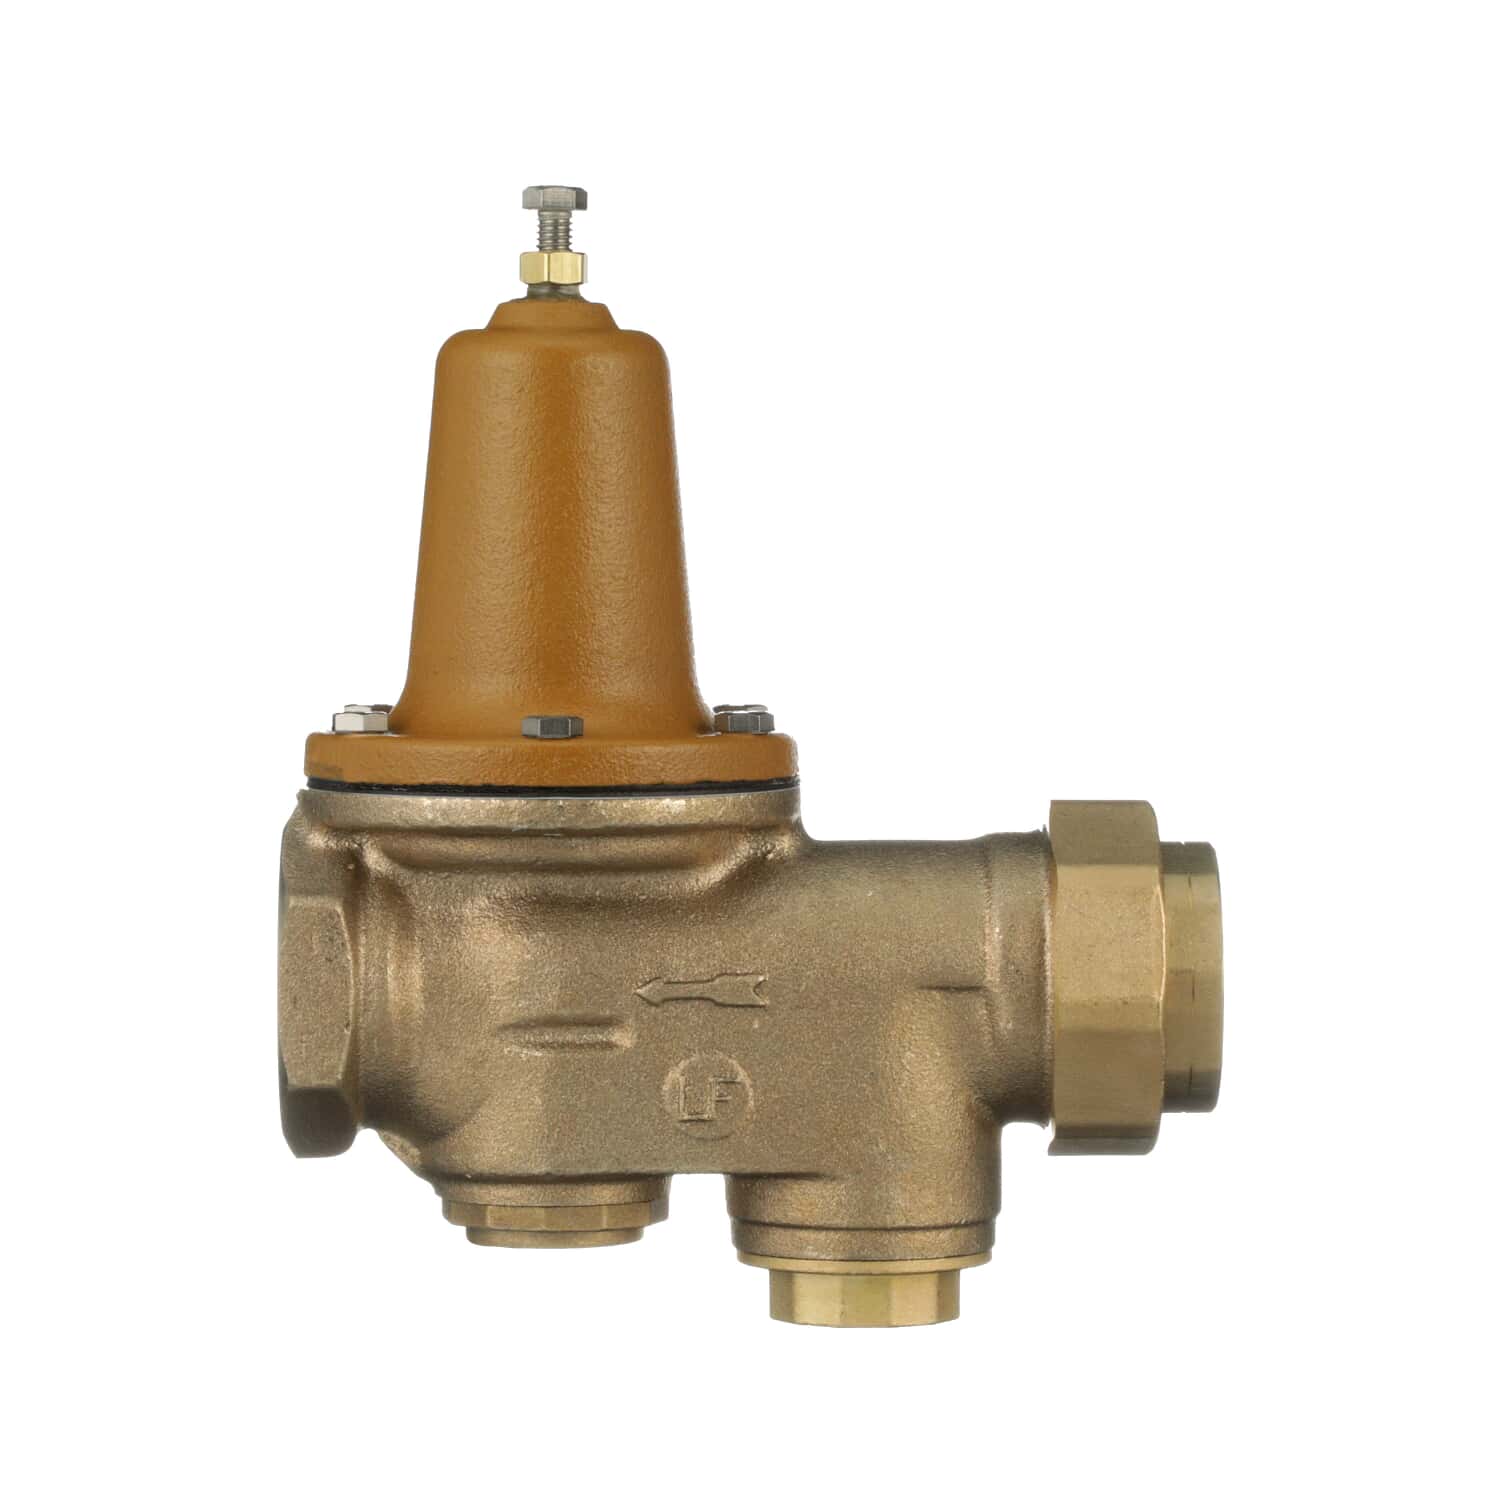 Watts 1 in. Lead-Free Brass FPT x FPT Water Pressure Reducing Valve 1  LF25AUB-Z3 - The Home Depot